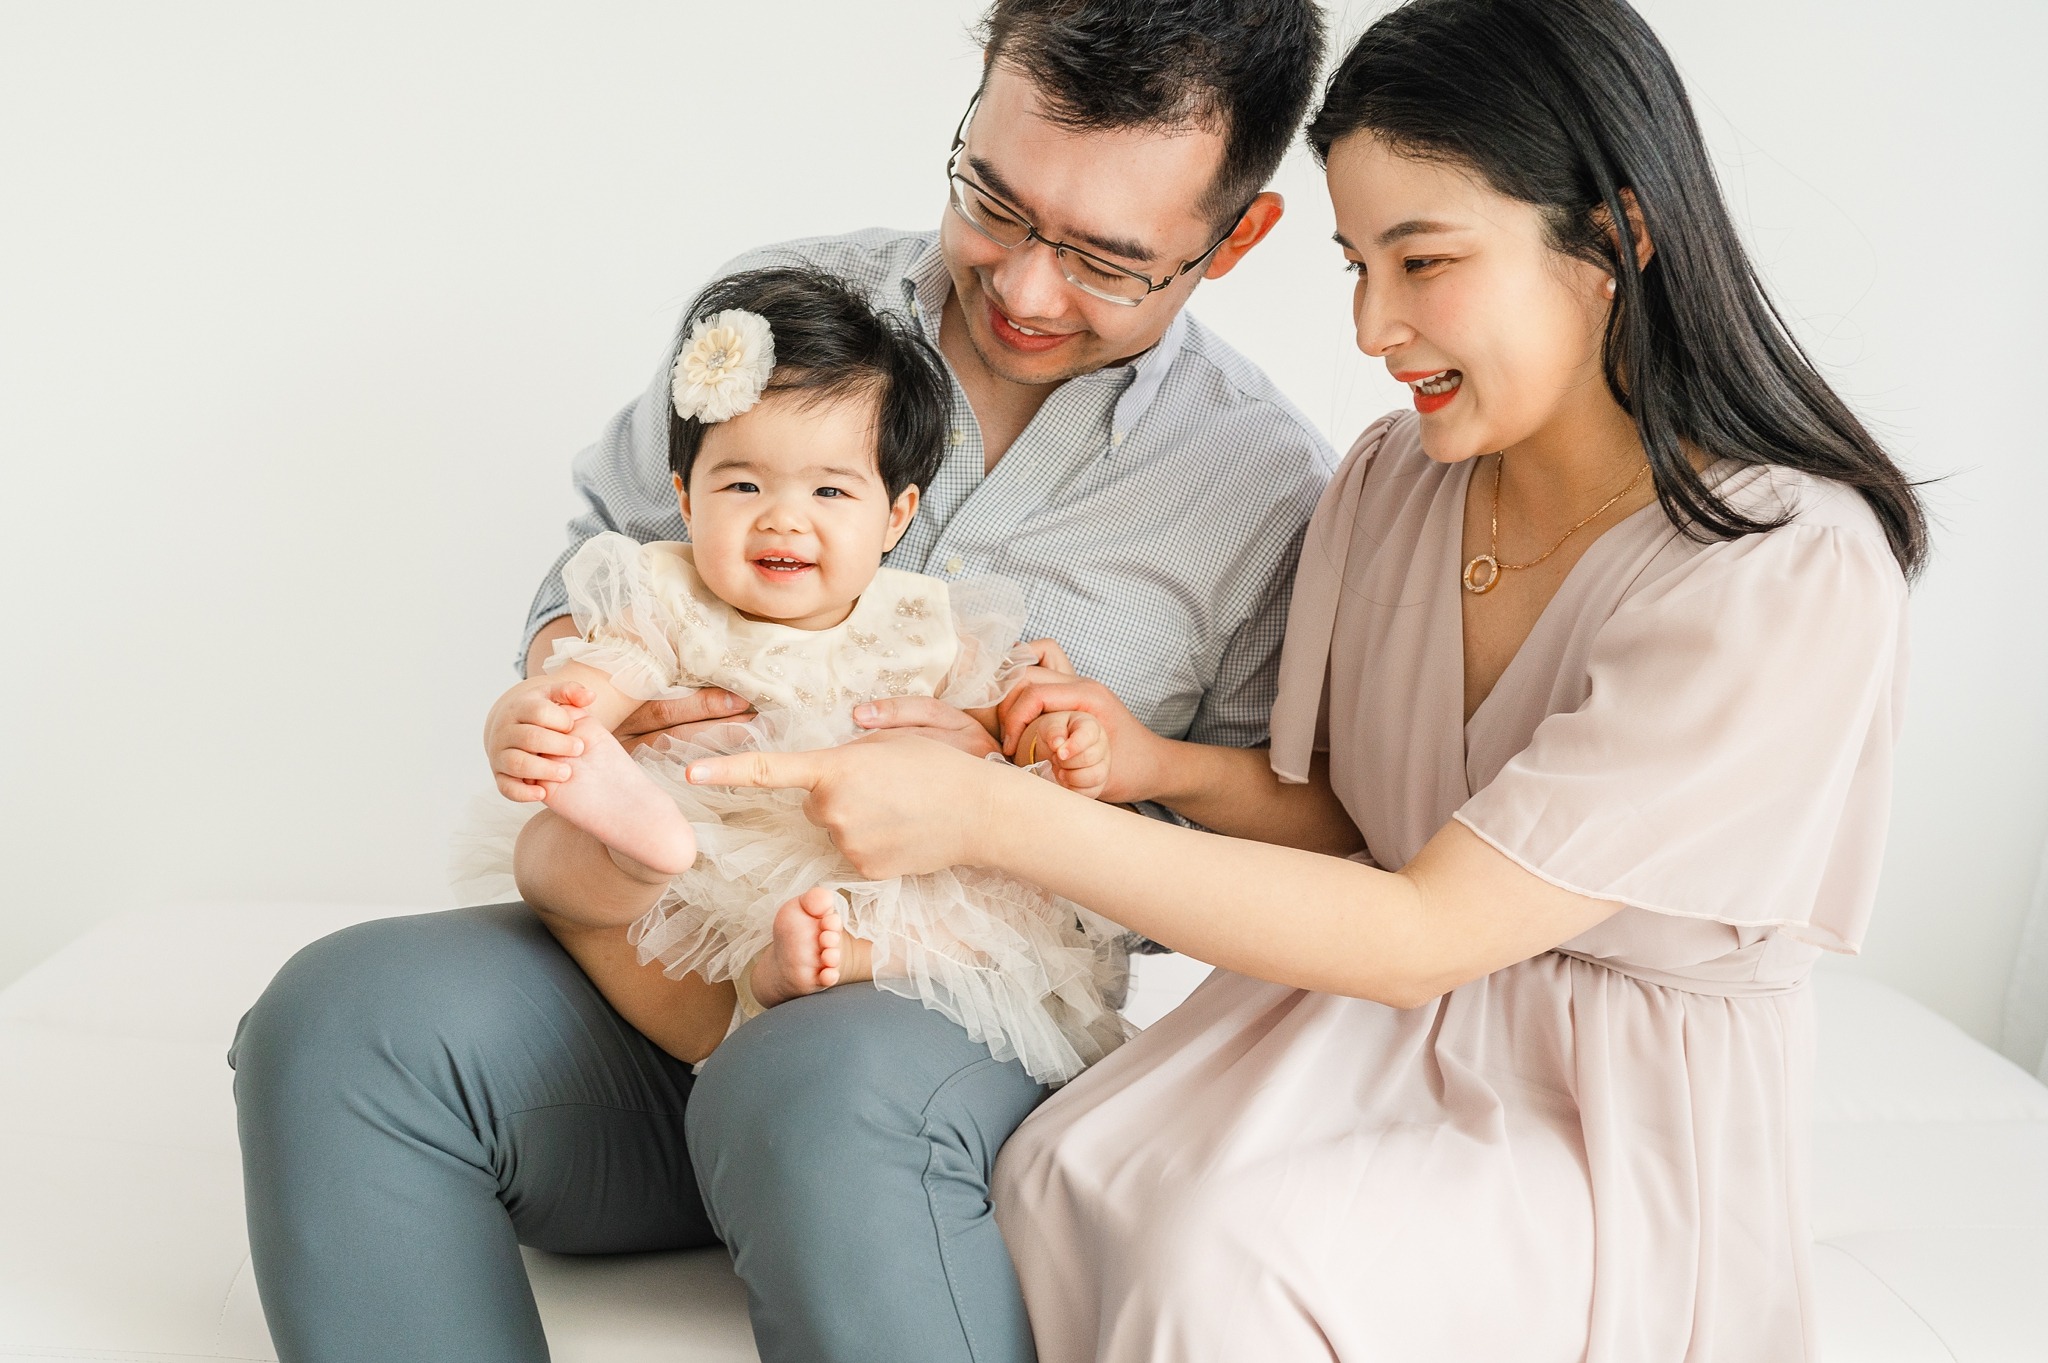 Family Portraits with a Baby | The Jiang Family